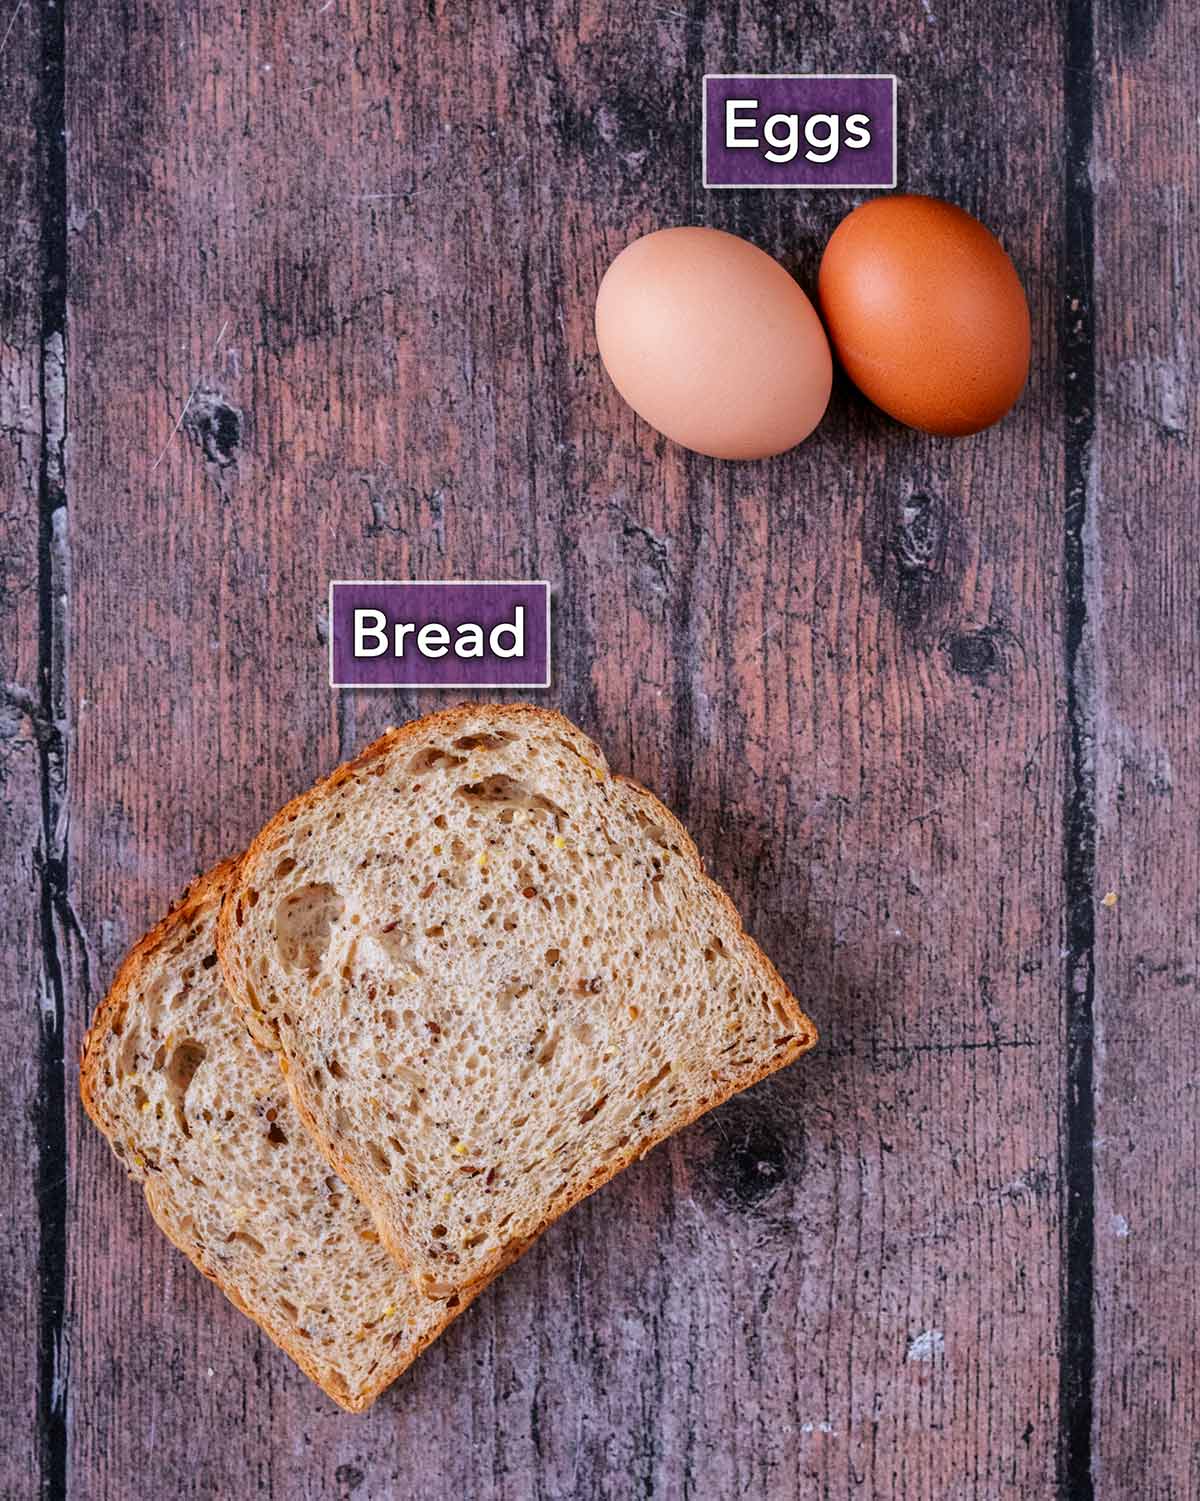 Two eggs and two slices of bread on a wooden surface, both with text overlay labels.